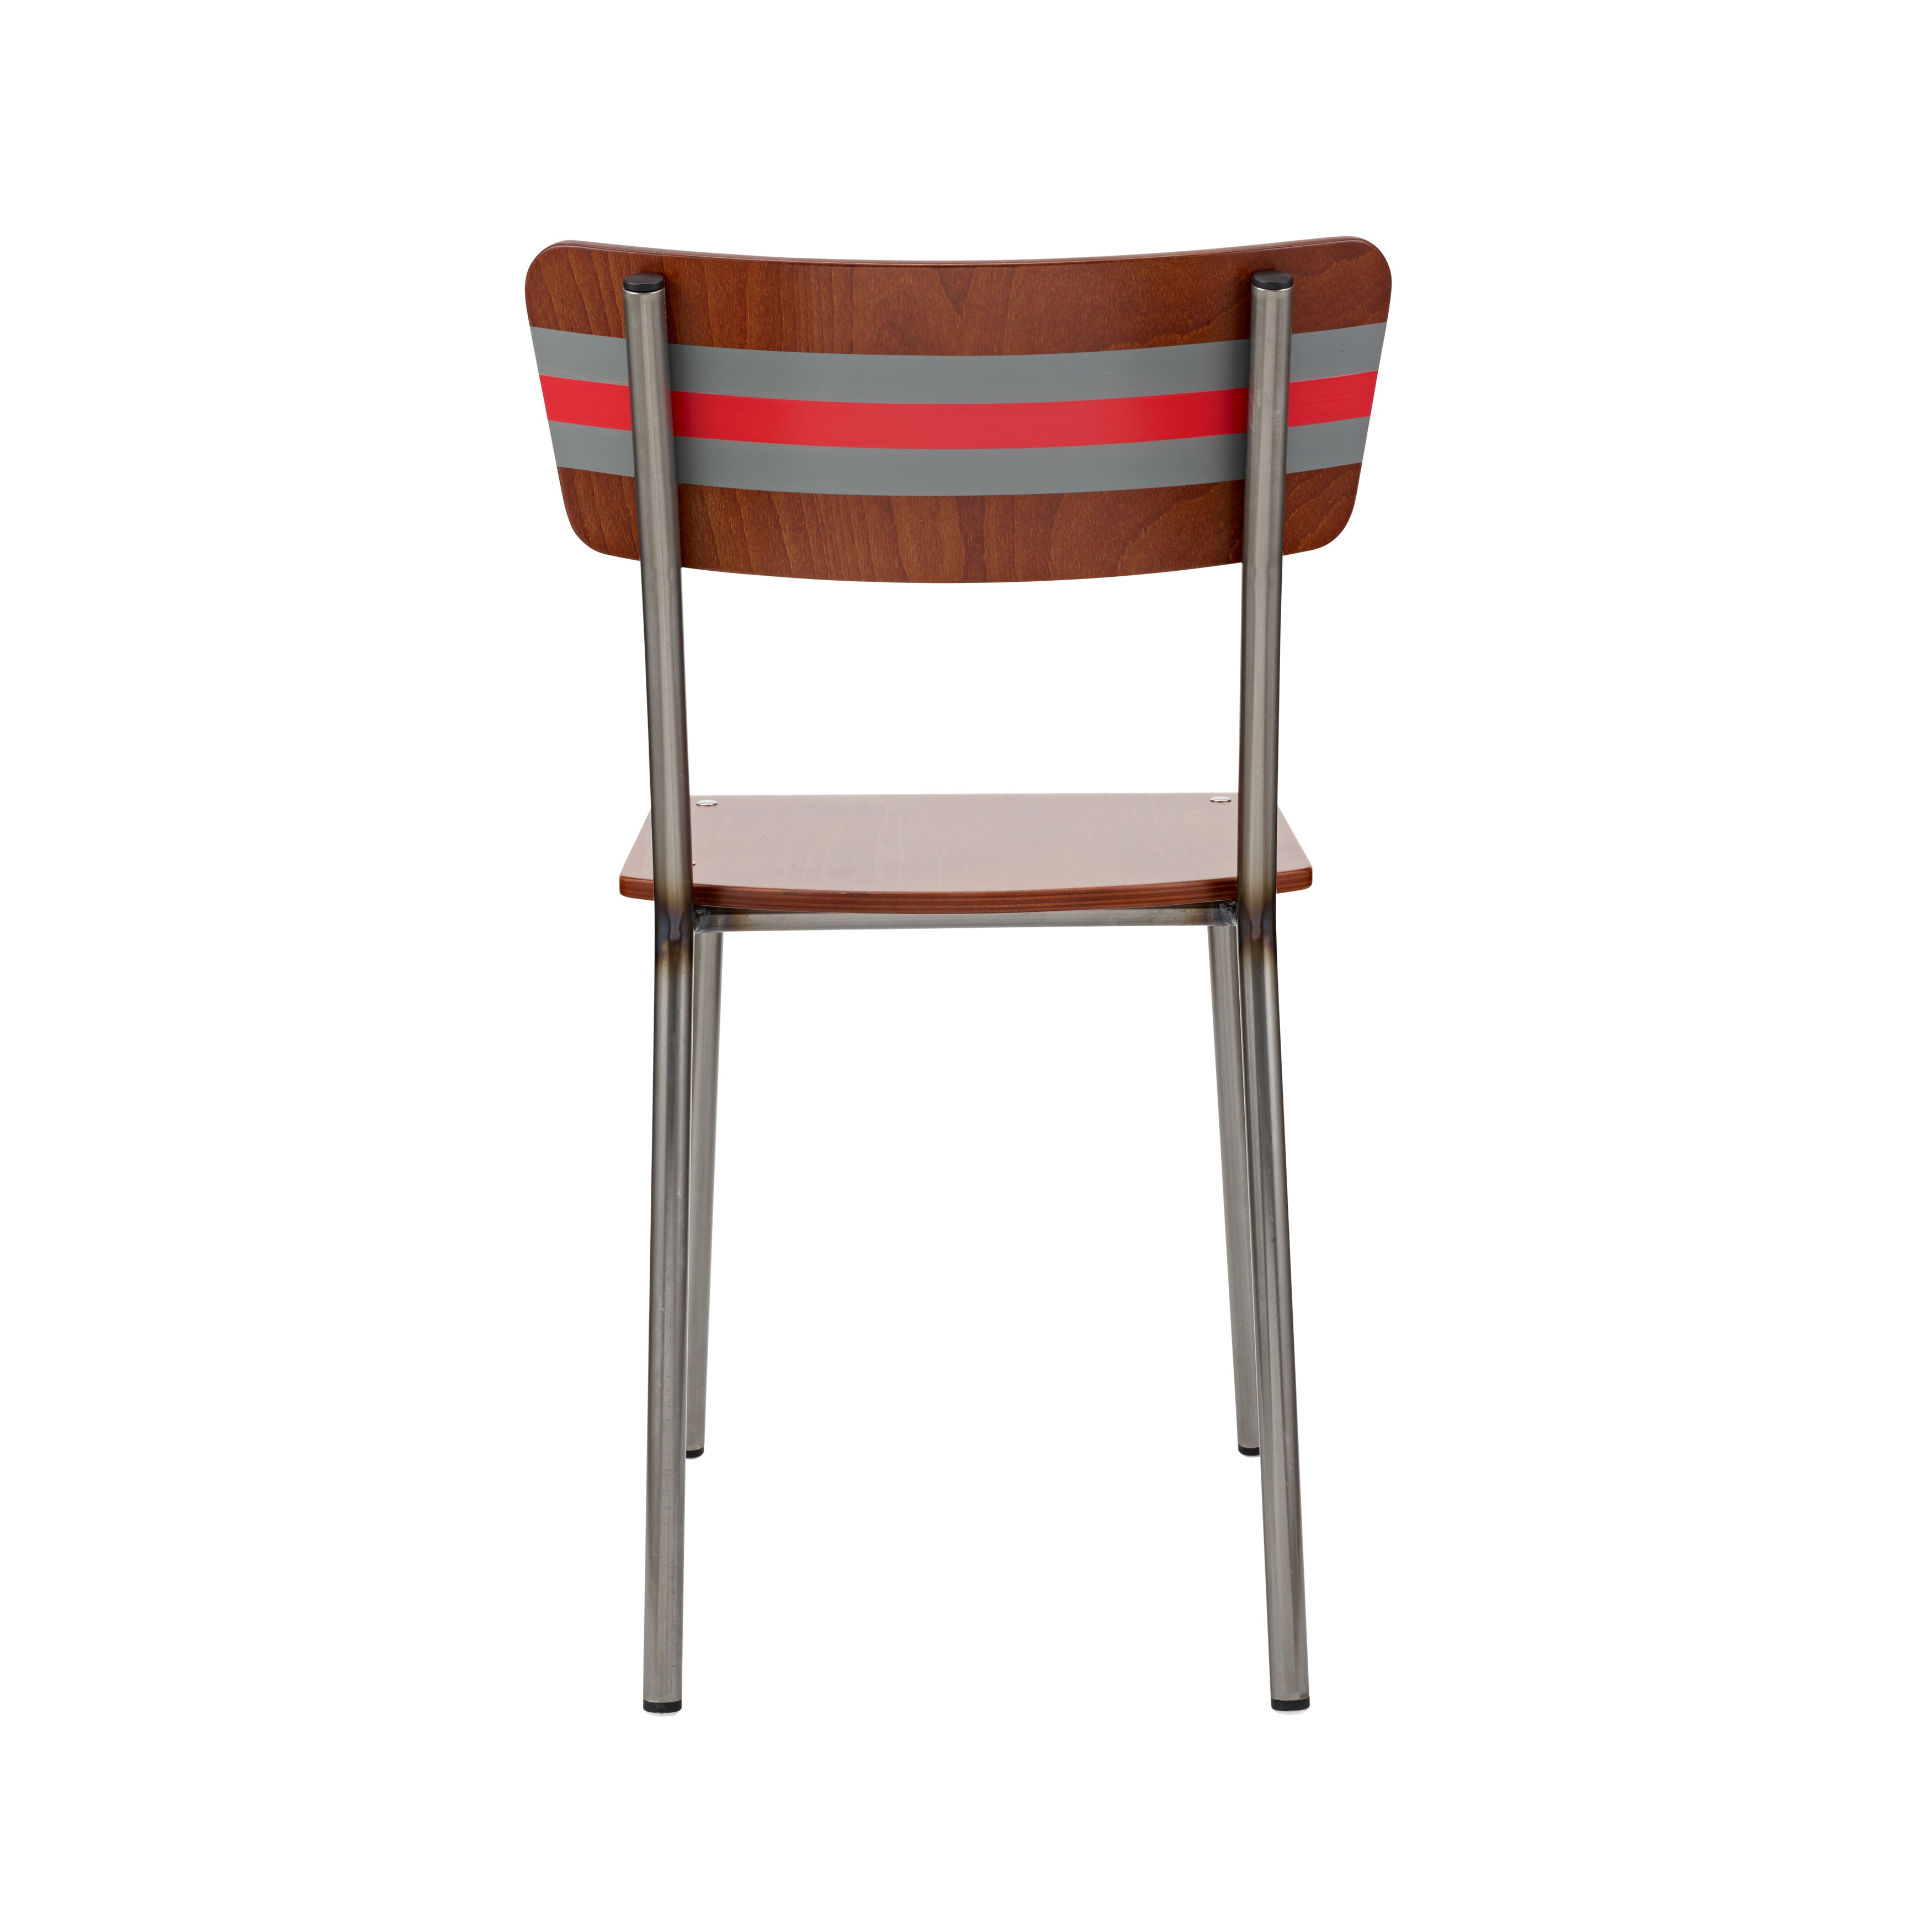 the-classic-british-school-chair-is-revisited-in-rich-mahogany-and-contemporary-stripe